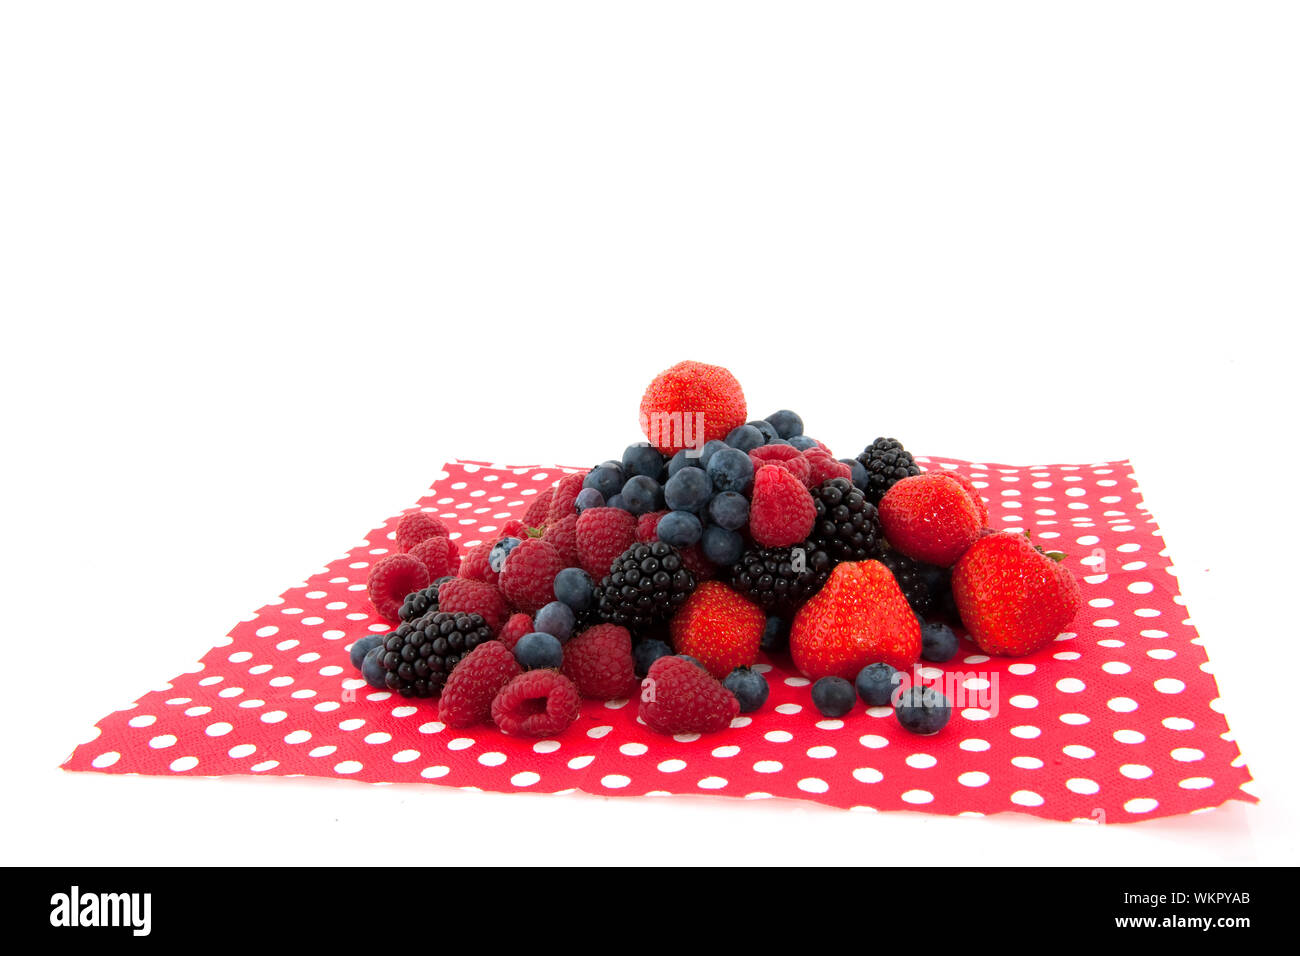 Diversity fruit in on a speckles napkin Stock Photo